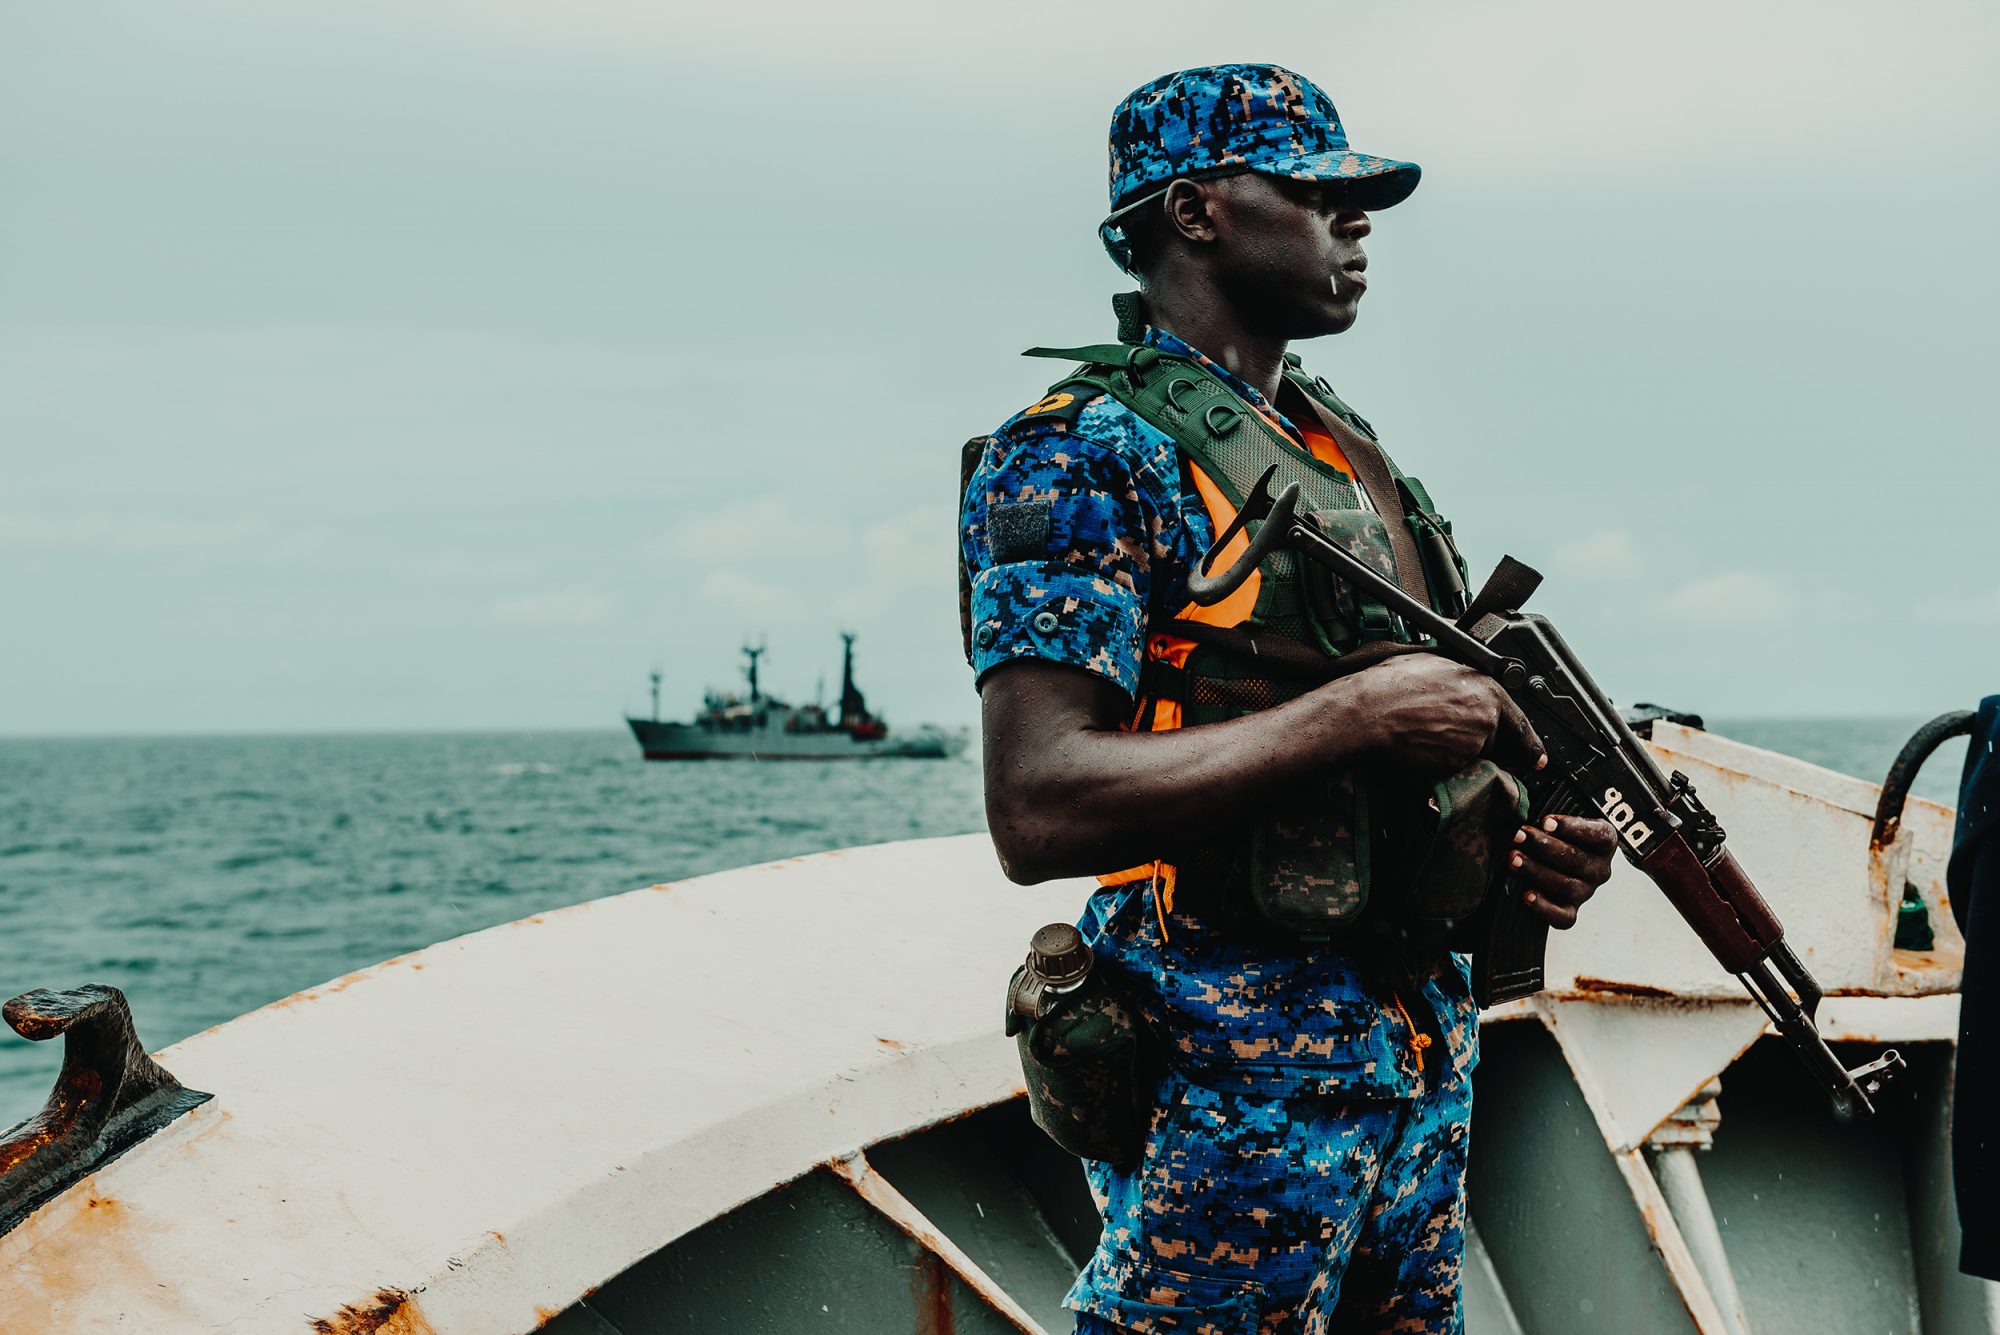 A Gambian Navy sailor stands guard aboard an arrested trawler, with Sea Shepherd’s Sam Simon in the background (Image © Sea Shepherd Global)